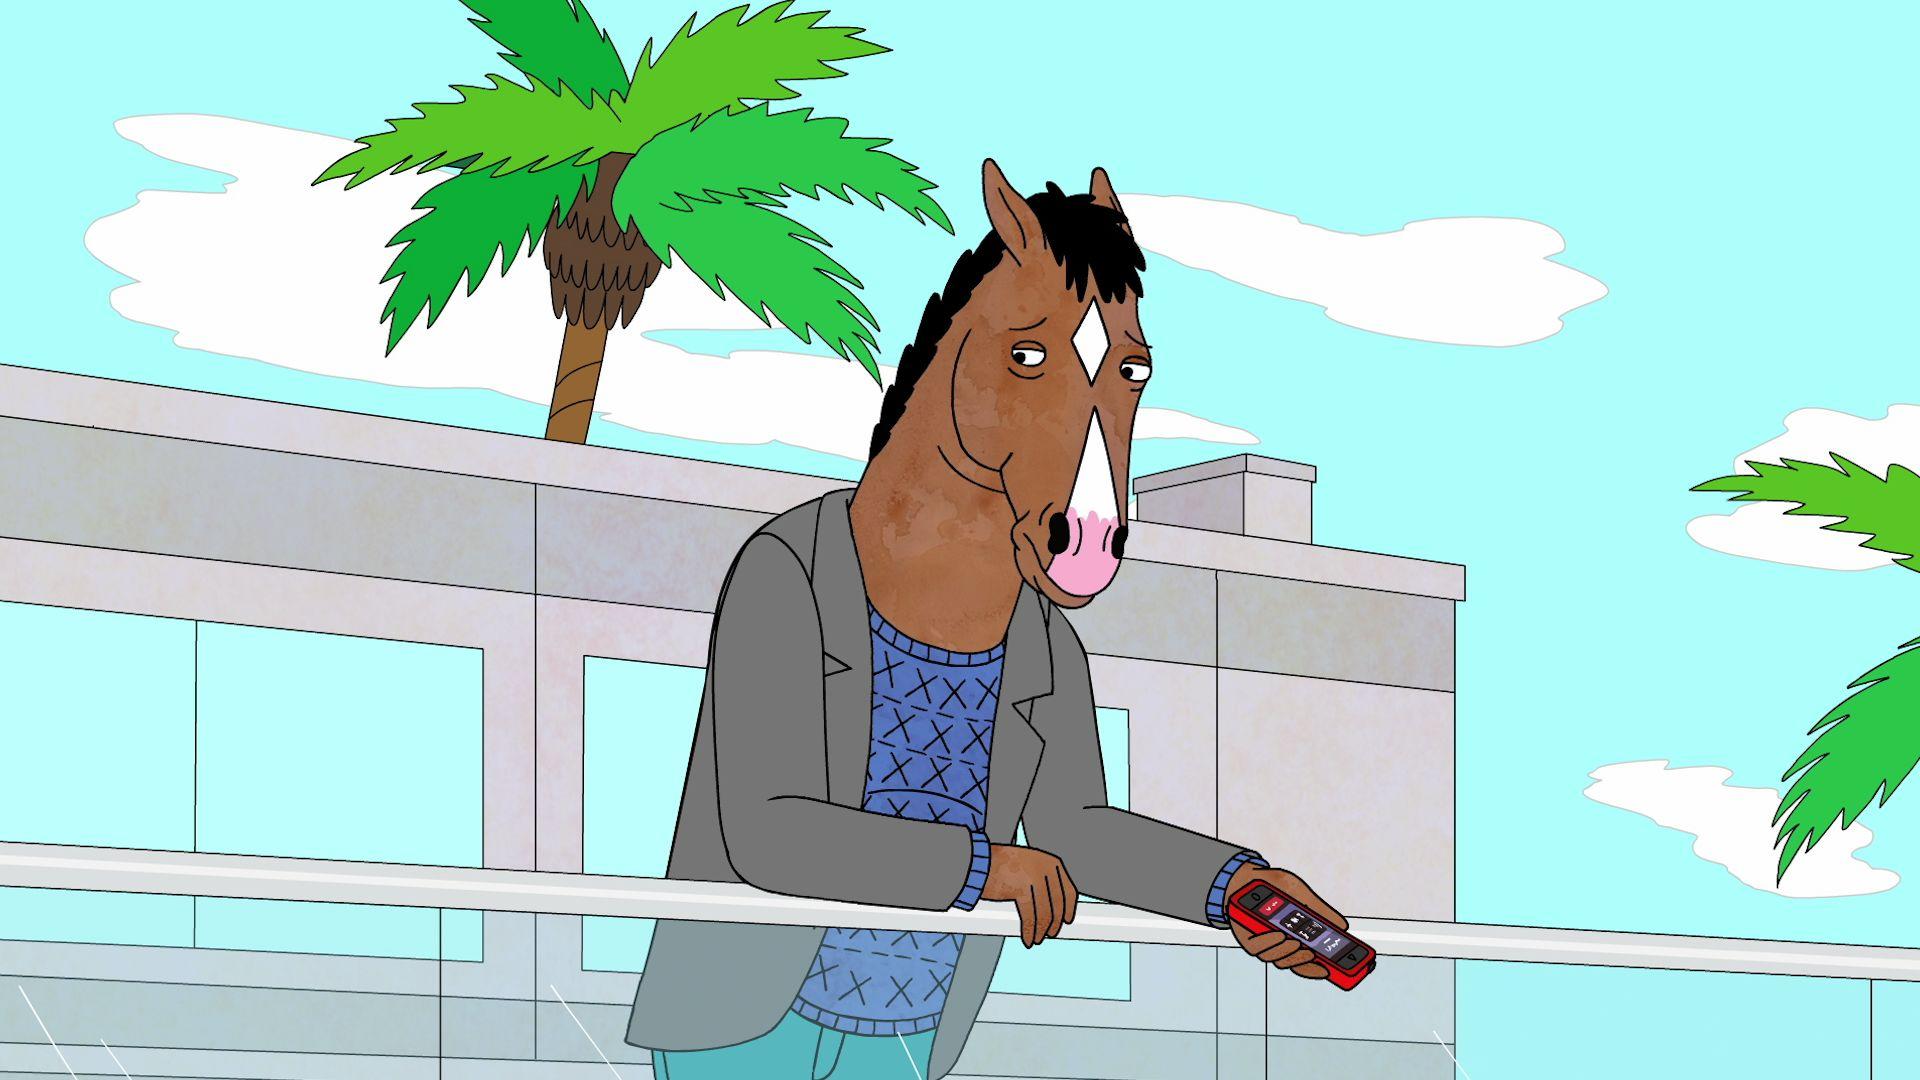 BoJack Horseman” Is A Comedy About Living In A Long Broken